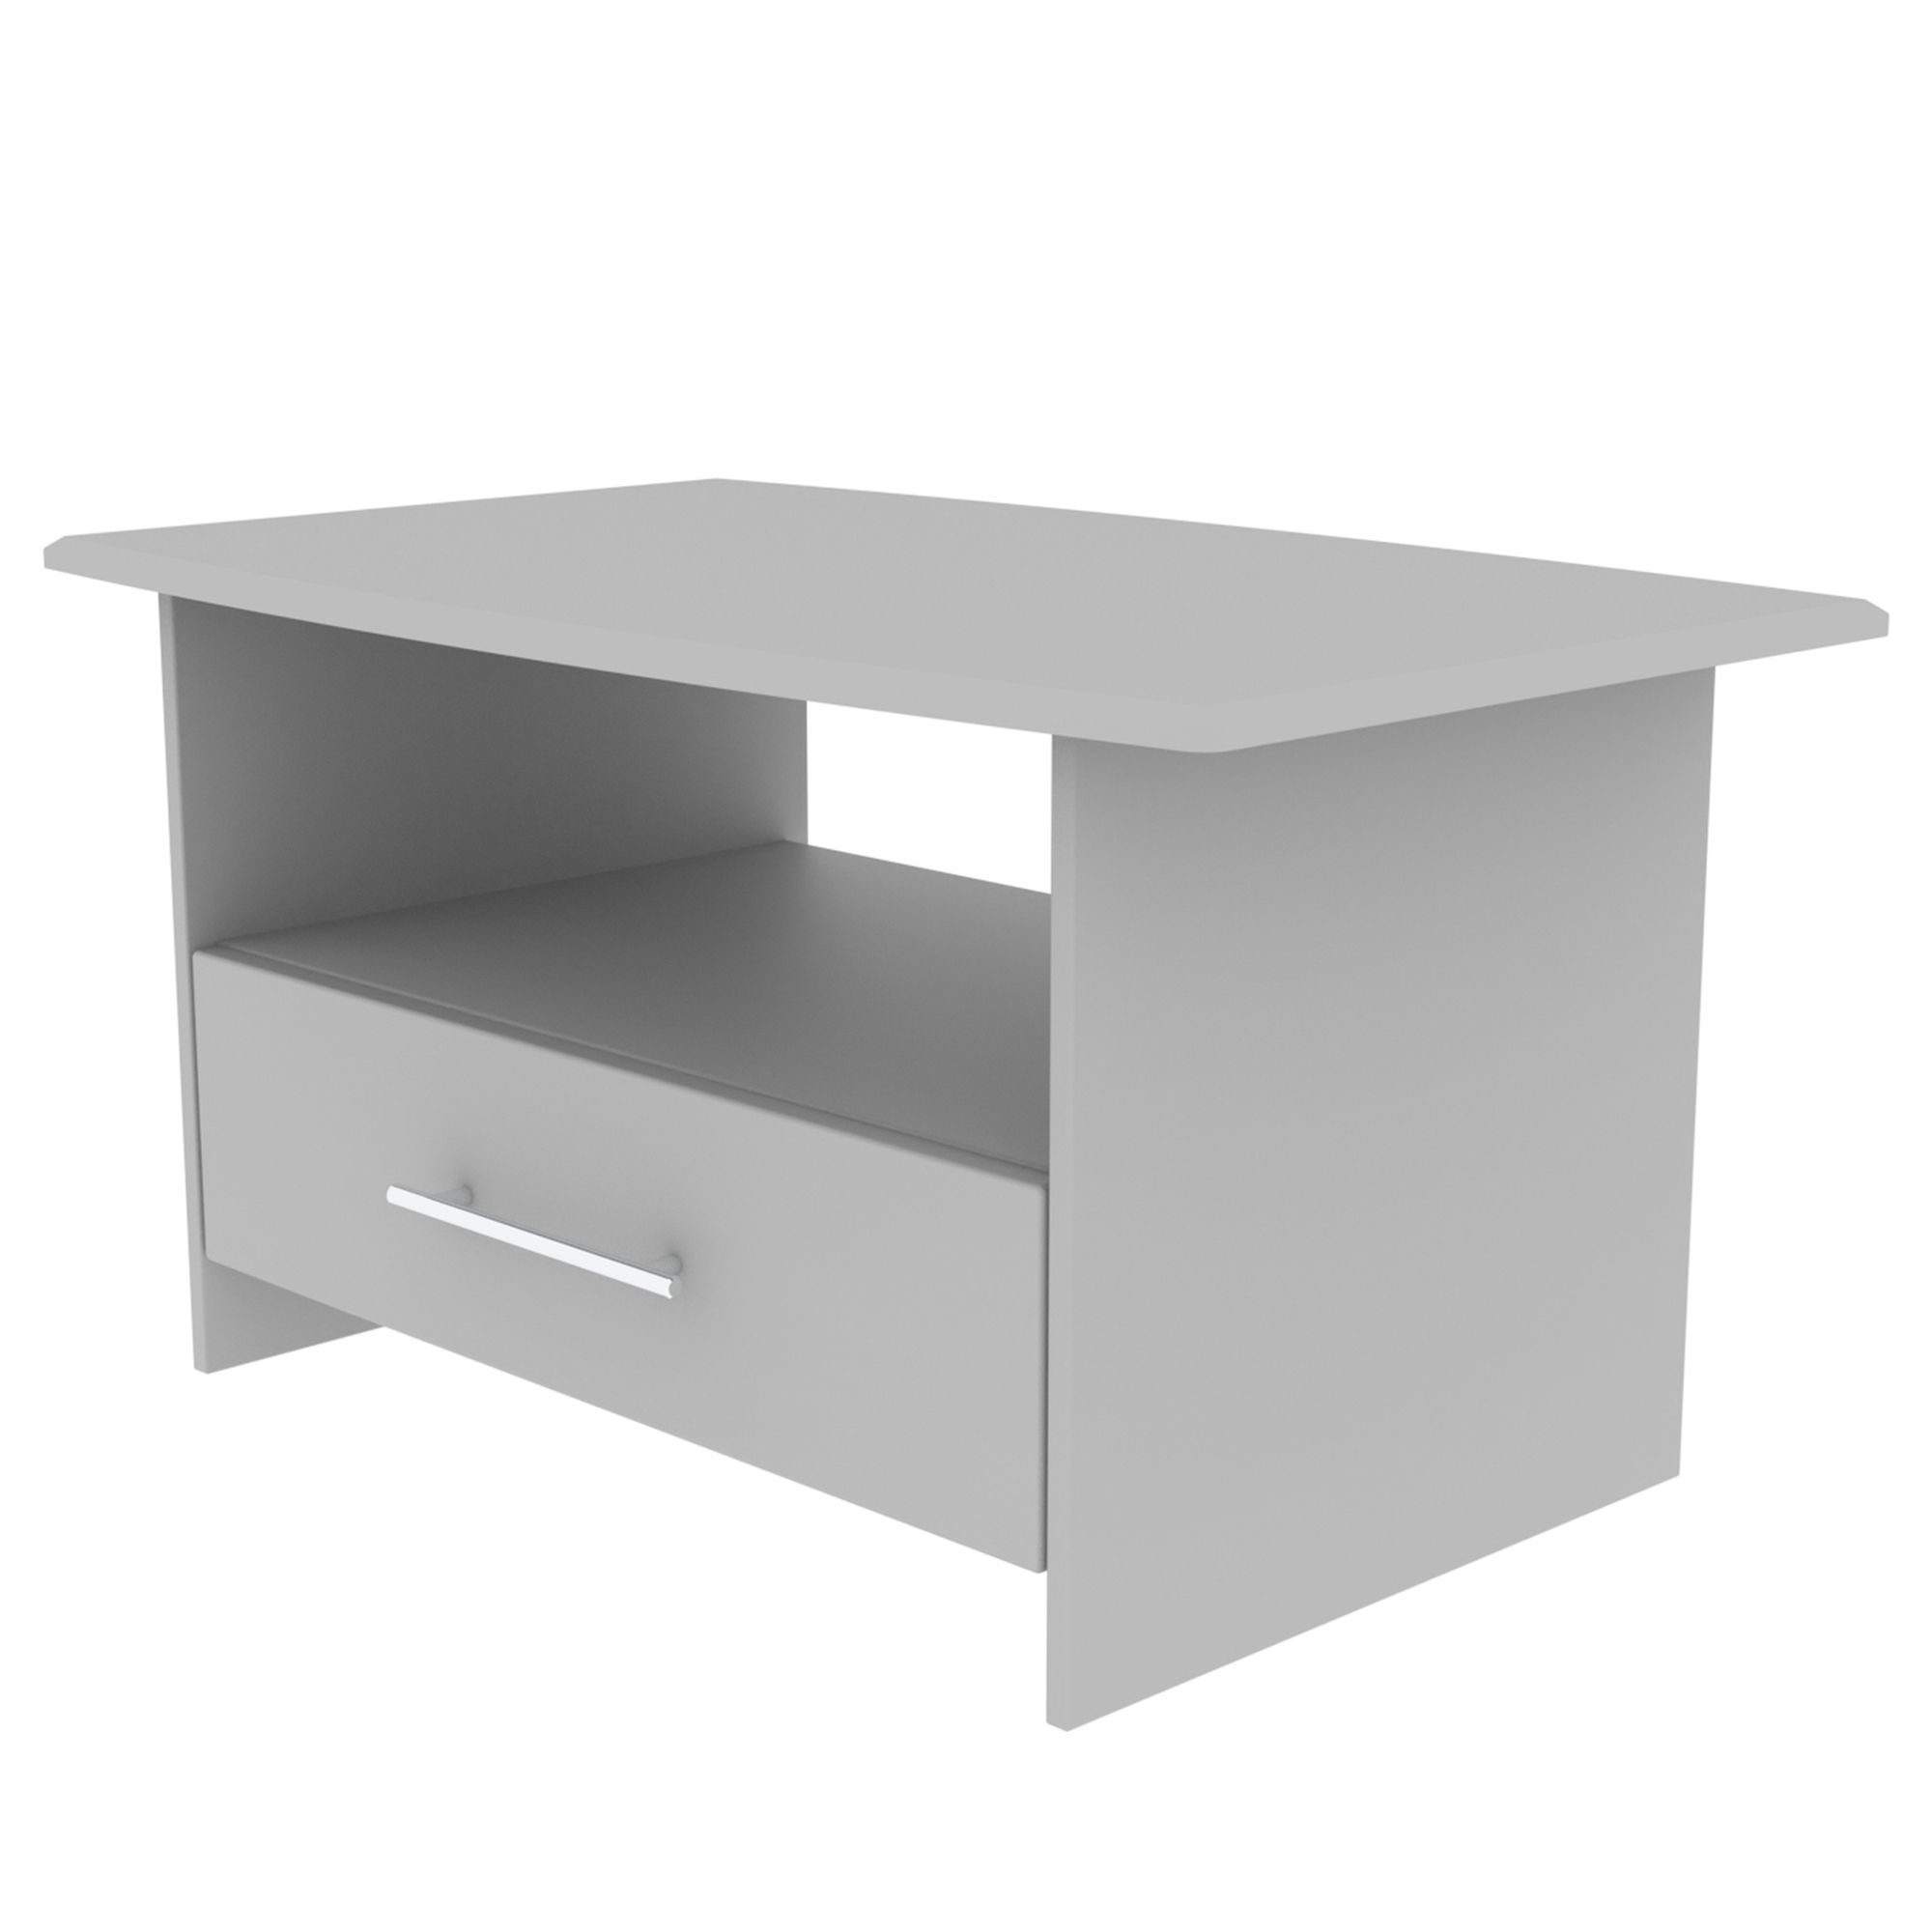 Ready assembled Grey 1 Drawer Coffee table (H)495mm (W)40mm